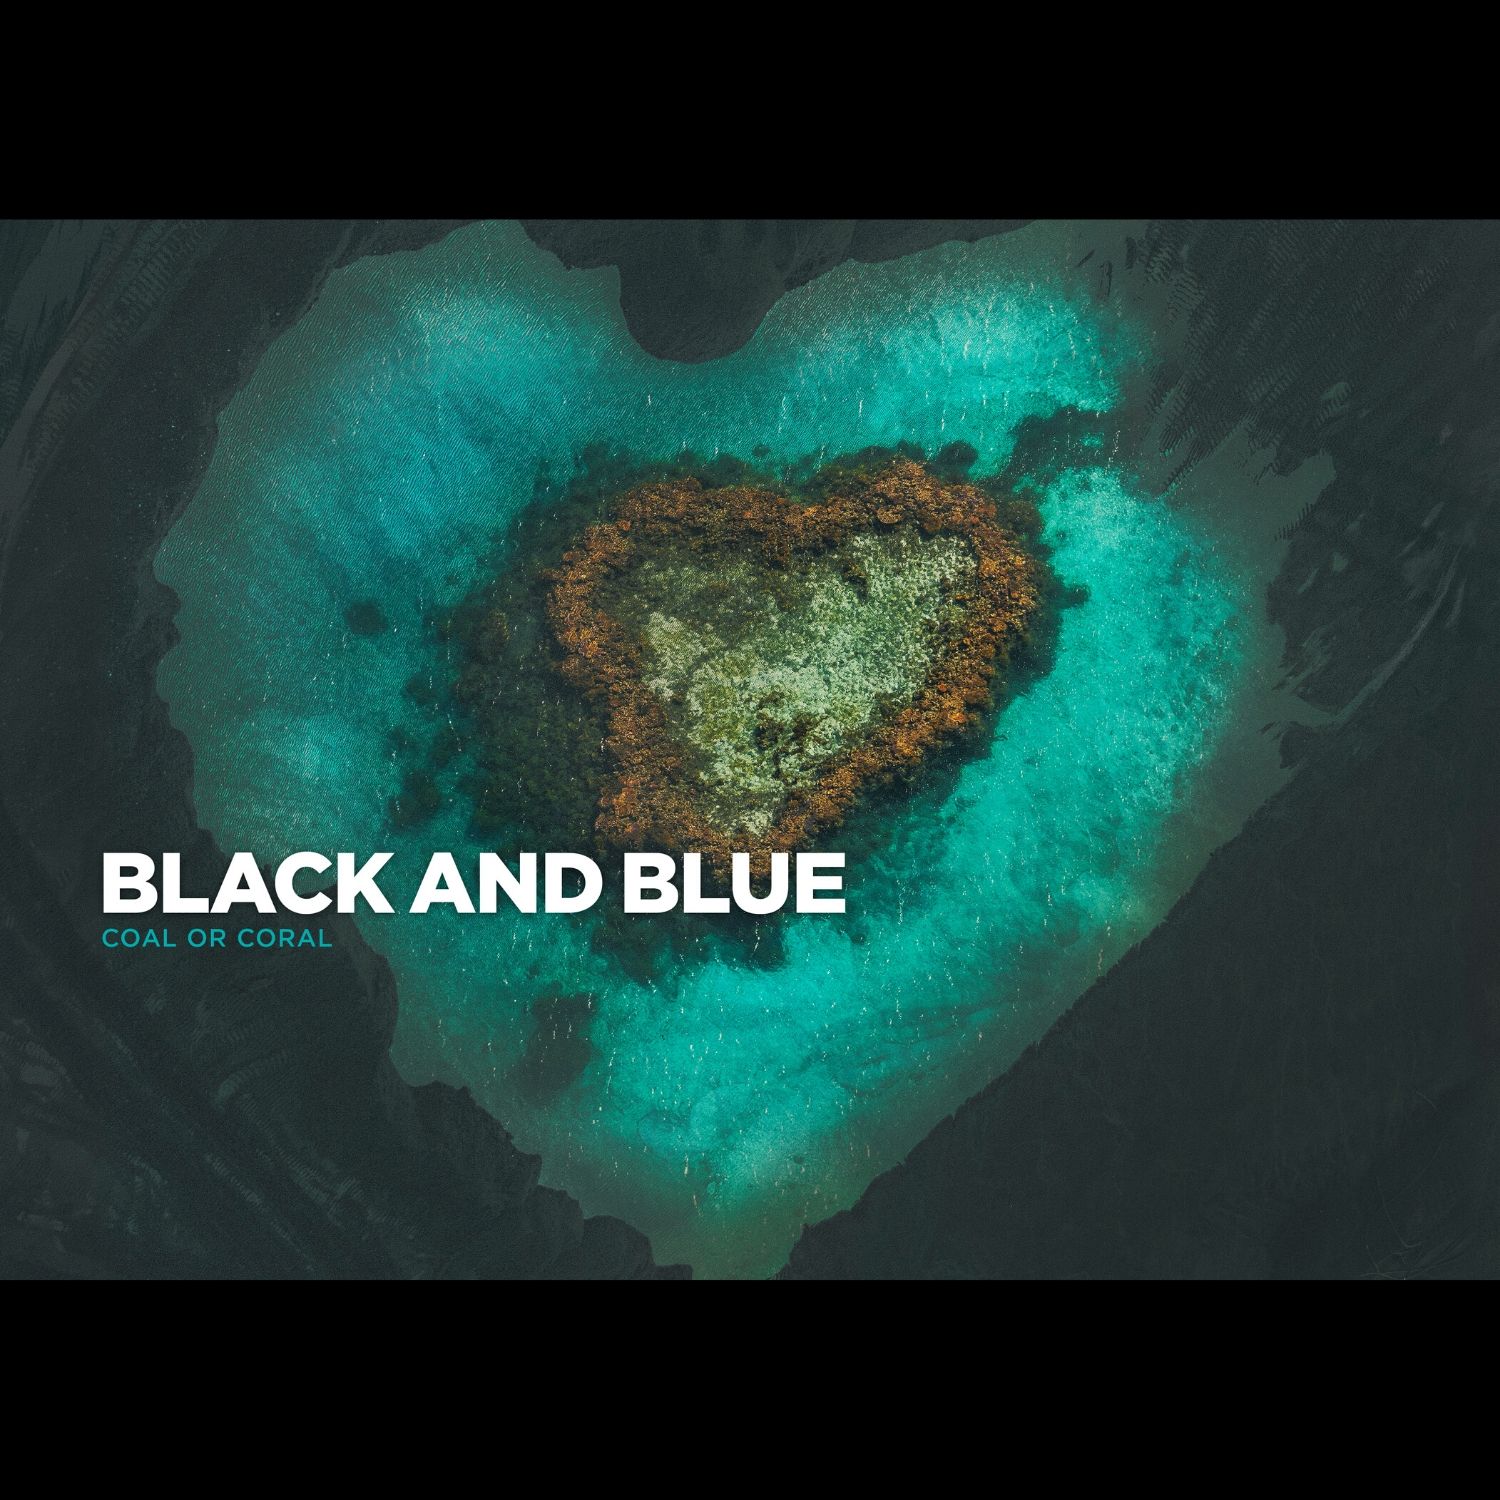 Limited Edition Photography Book Black and Blue by The Light Collective featuring Ignacio Palacios